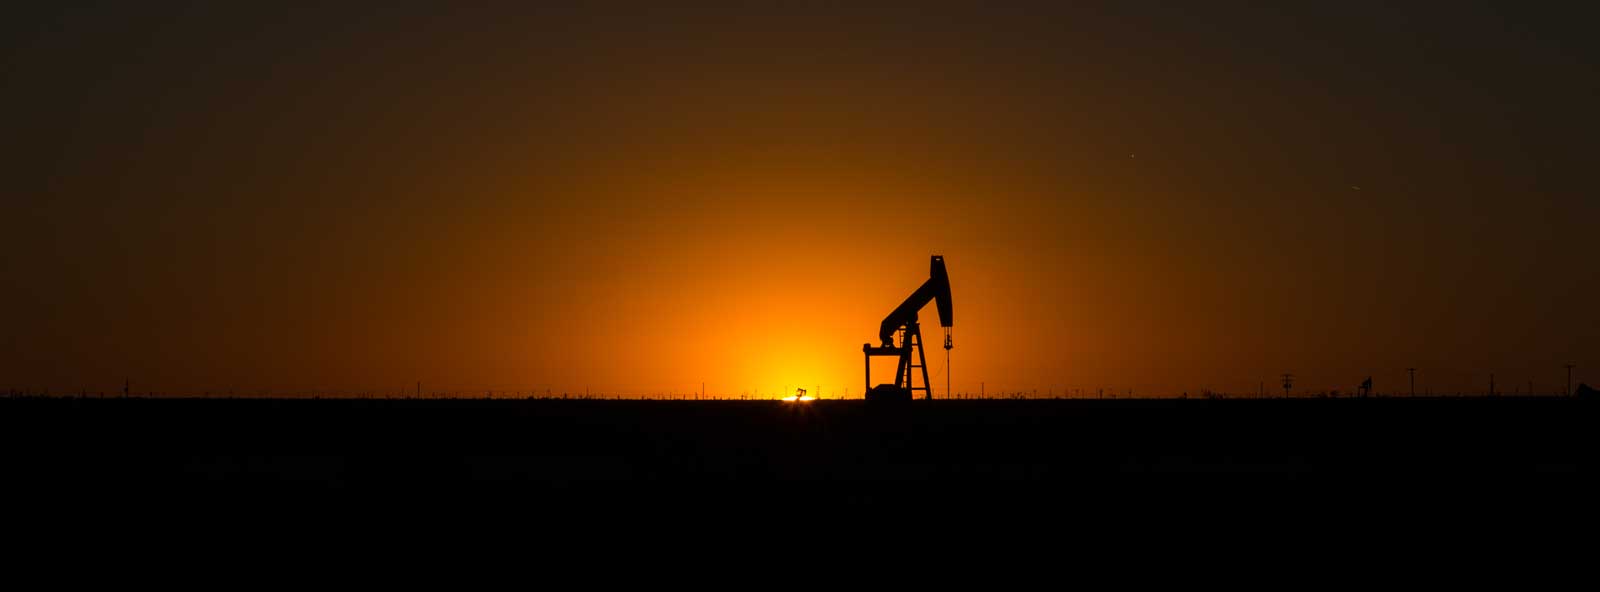 An oil and gas pumpjack against a bright orange sunset